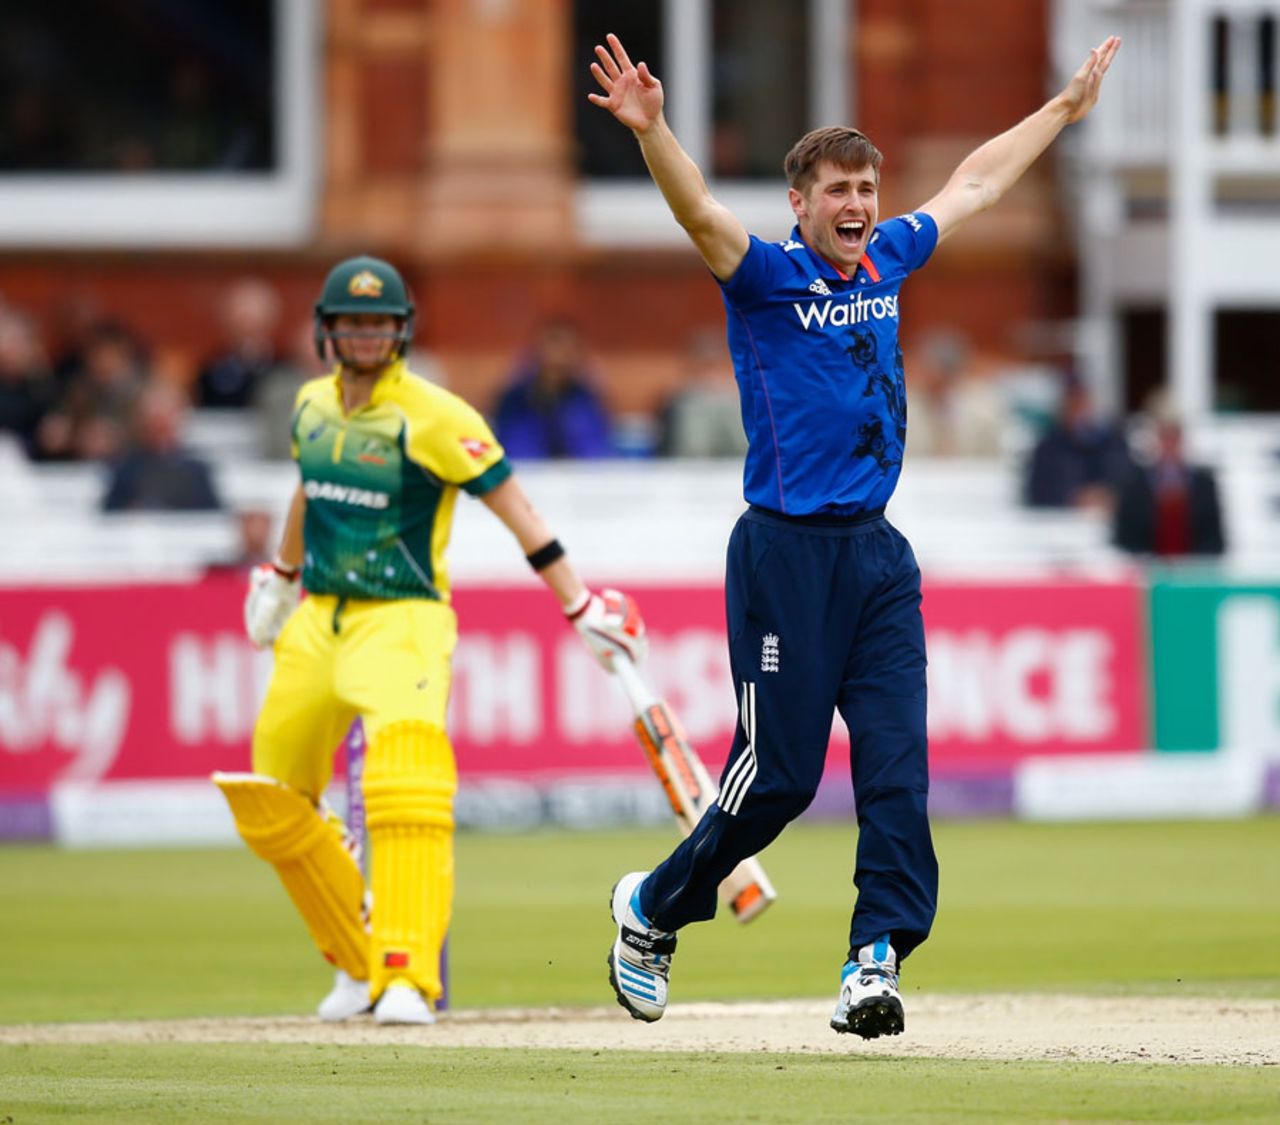 Chris Woakes unsuccessfully appeals for the wicket of Steven Smith, England v Australia, 2nd ODI, Lord's, September 5, 2015